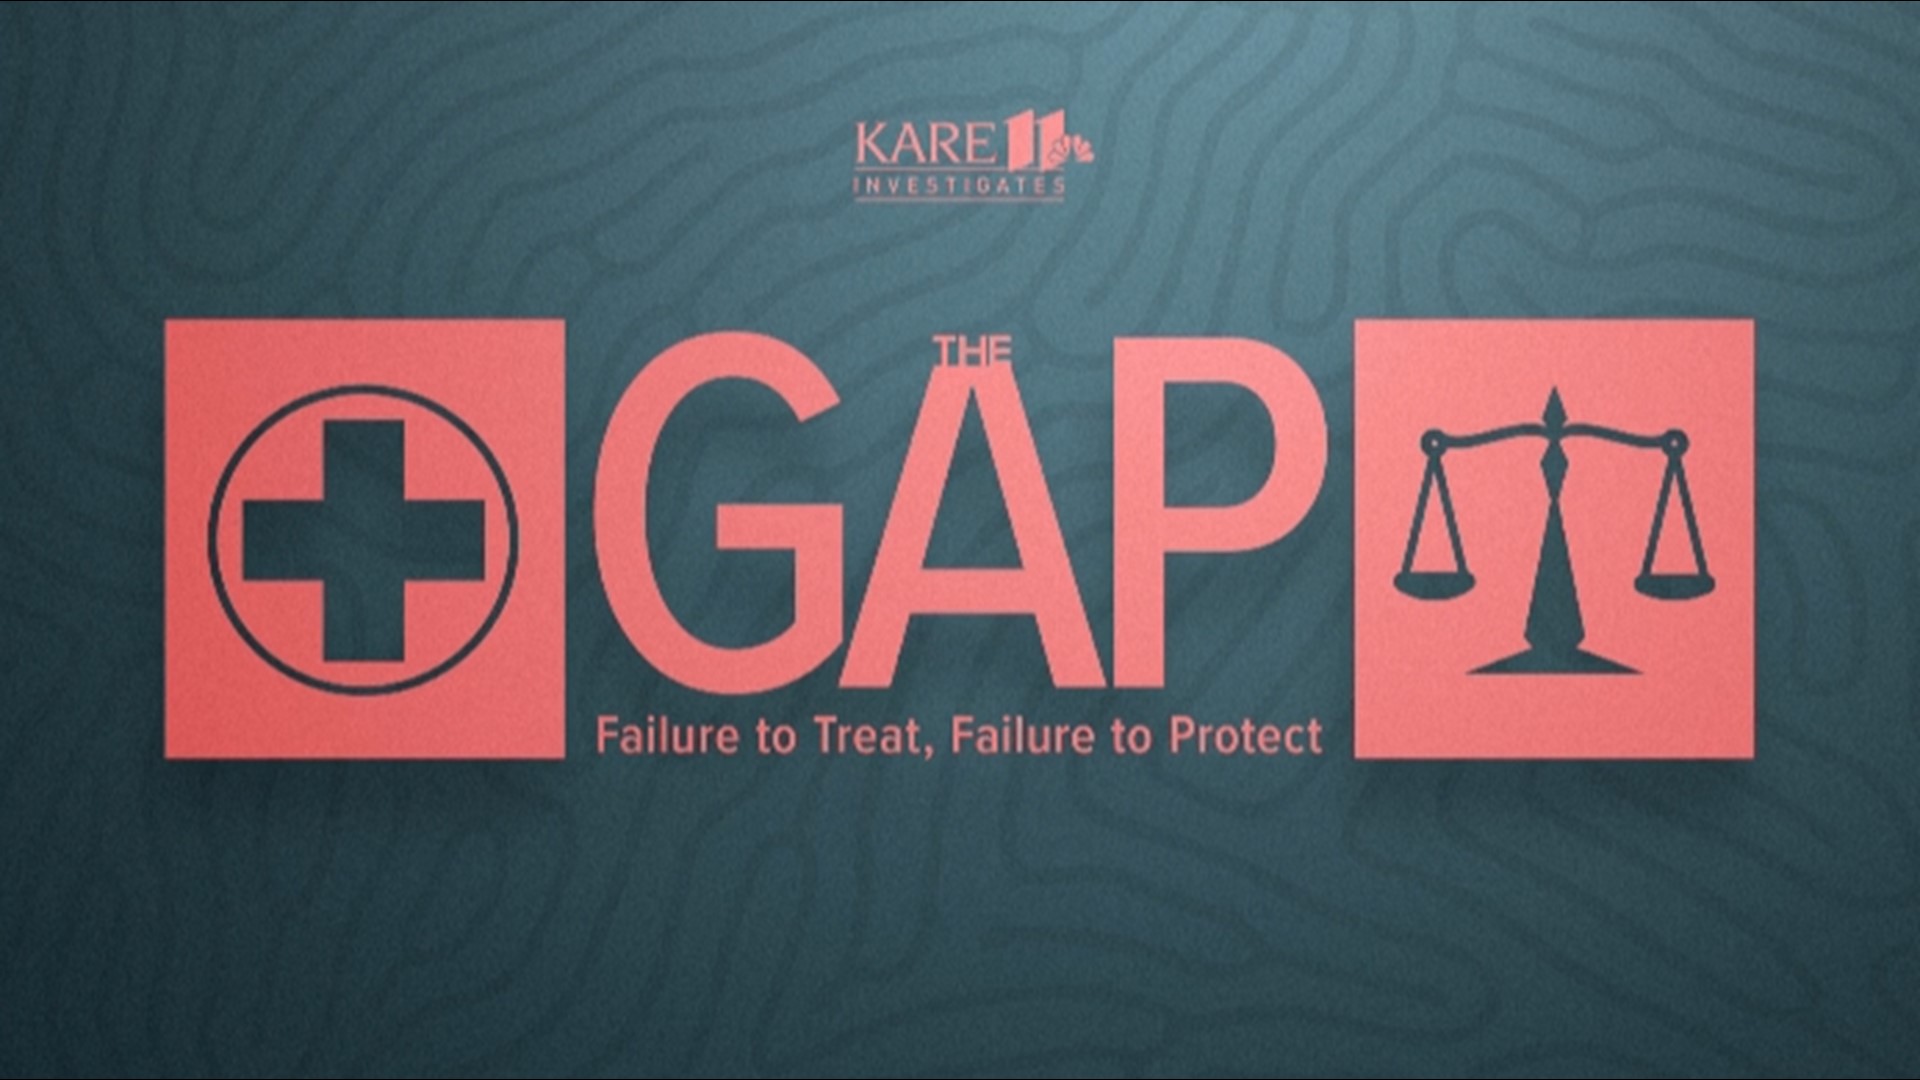 Citing a public safety crisis, state lawmakers pledge more reforms to close gaps exposed in a KARE 11 investigation.